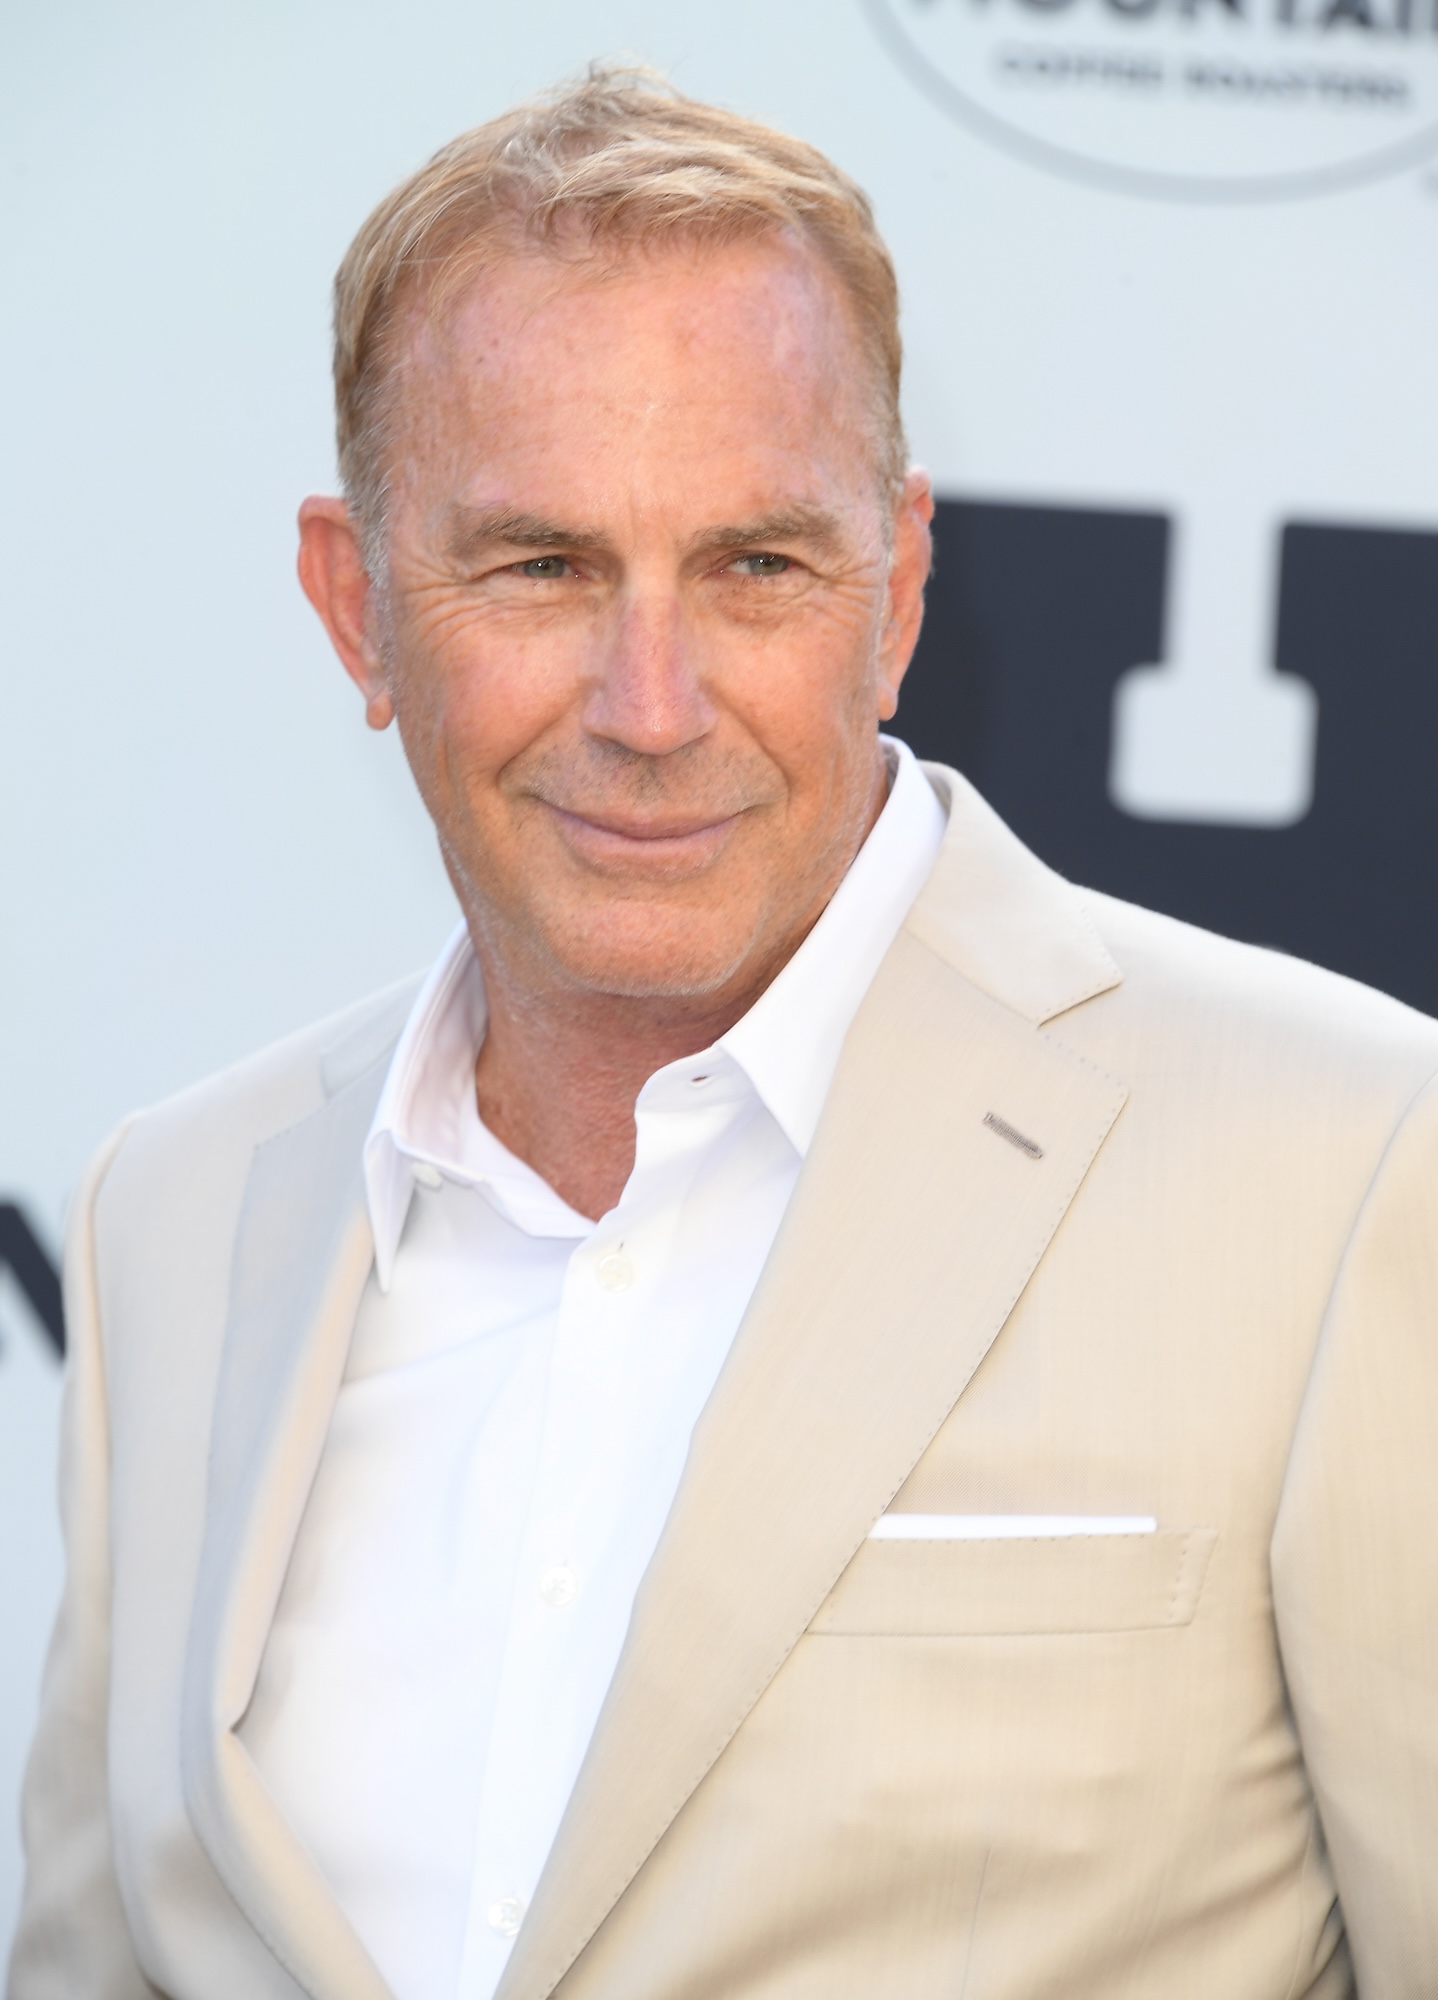 Kevin Costner Knows He ‘Makes Movies for Men’: ‘That’s What I Do’